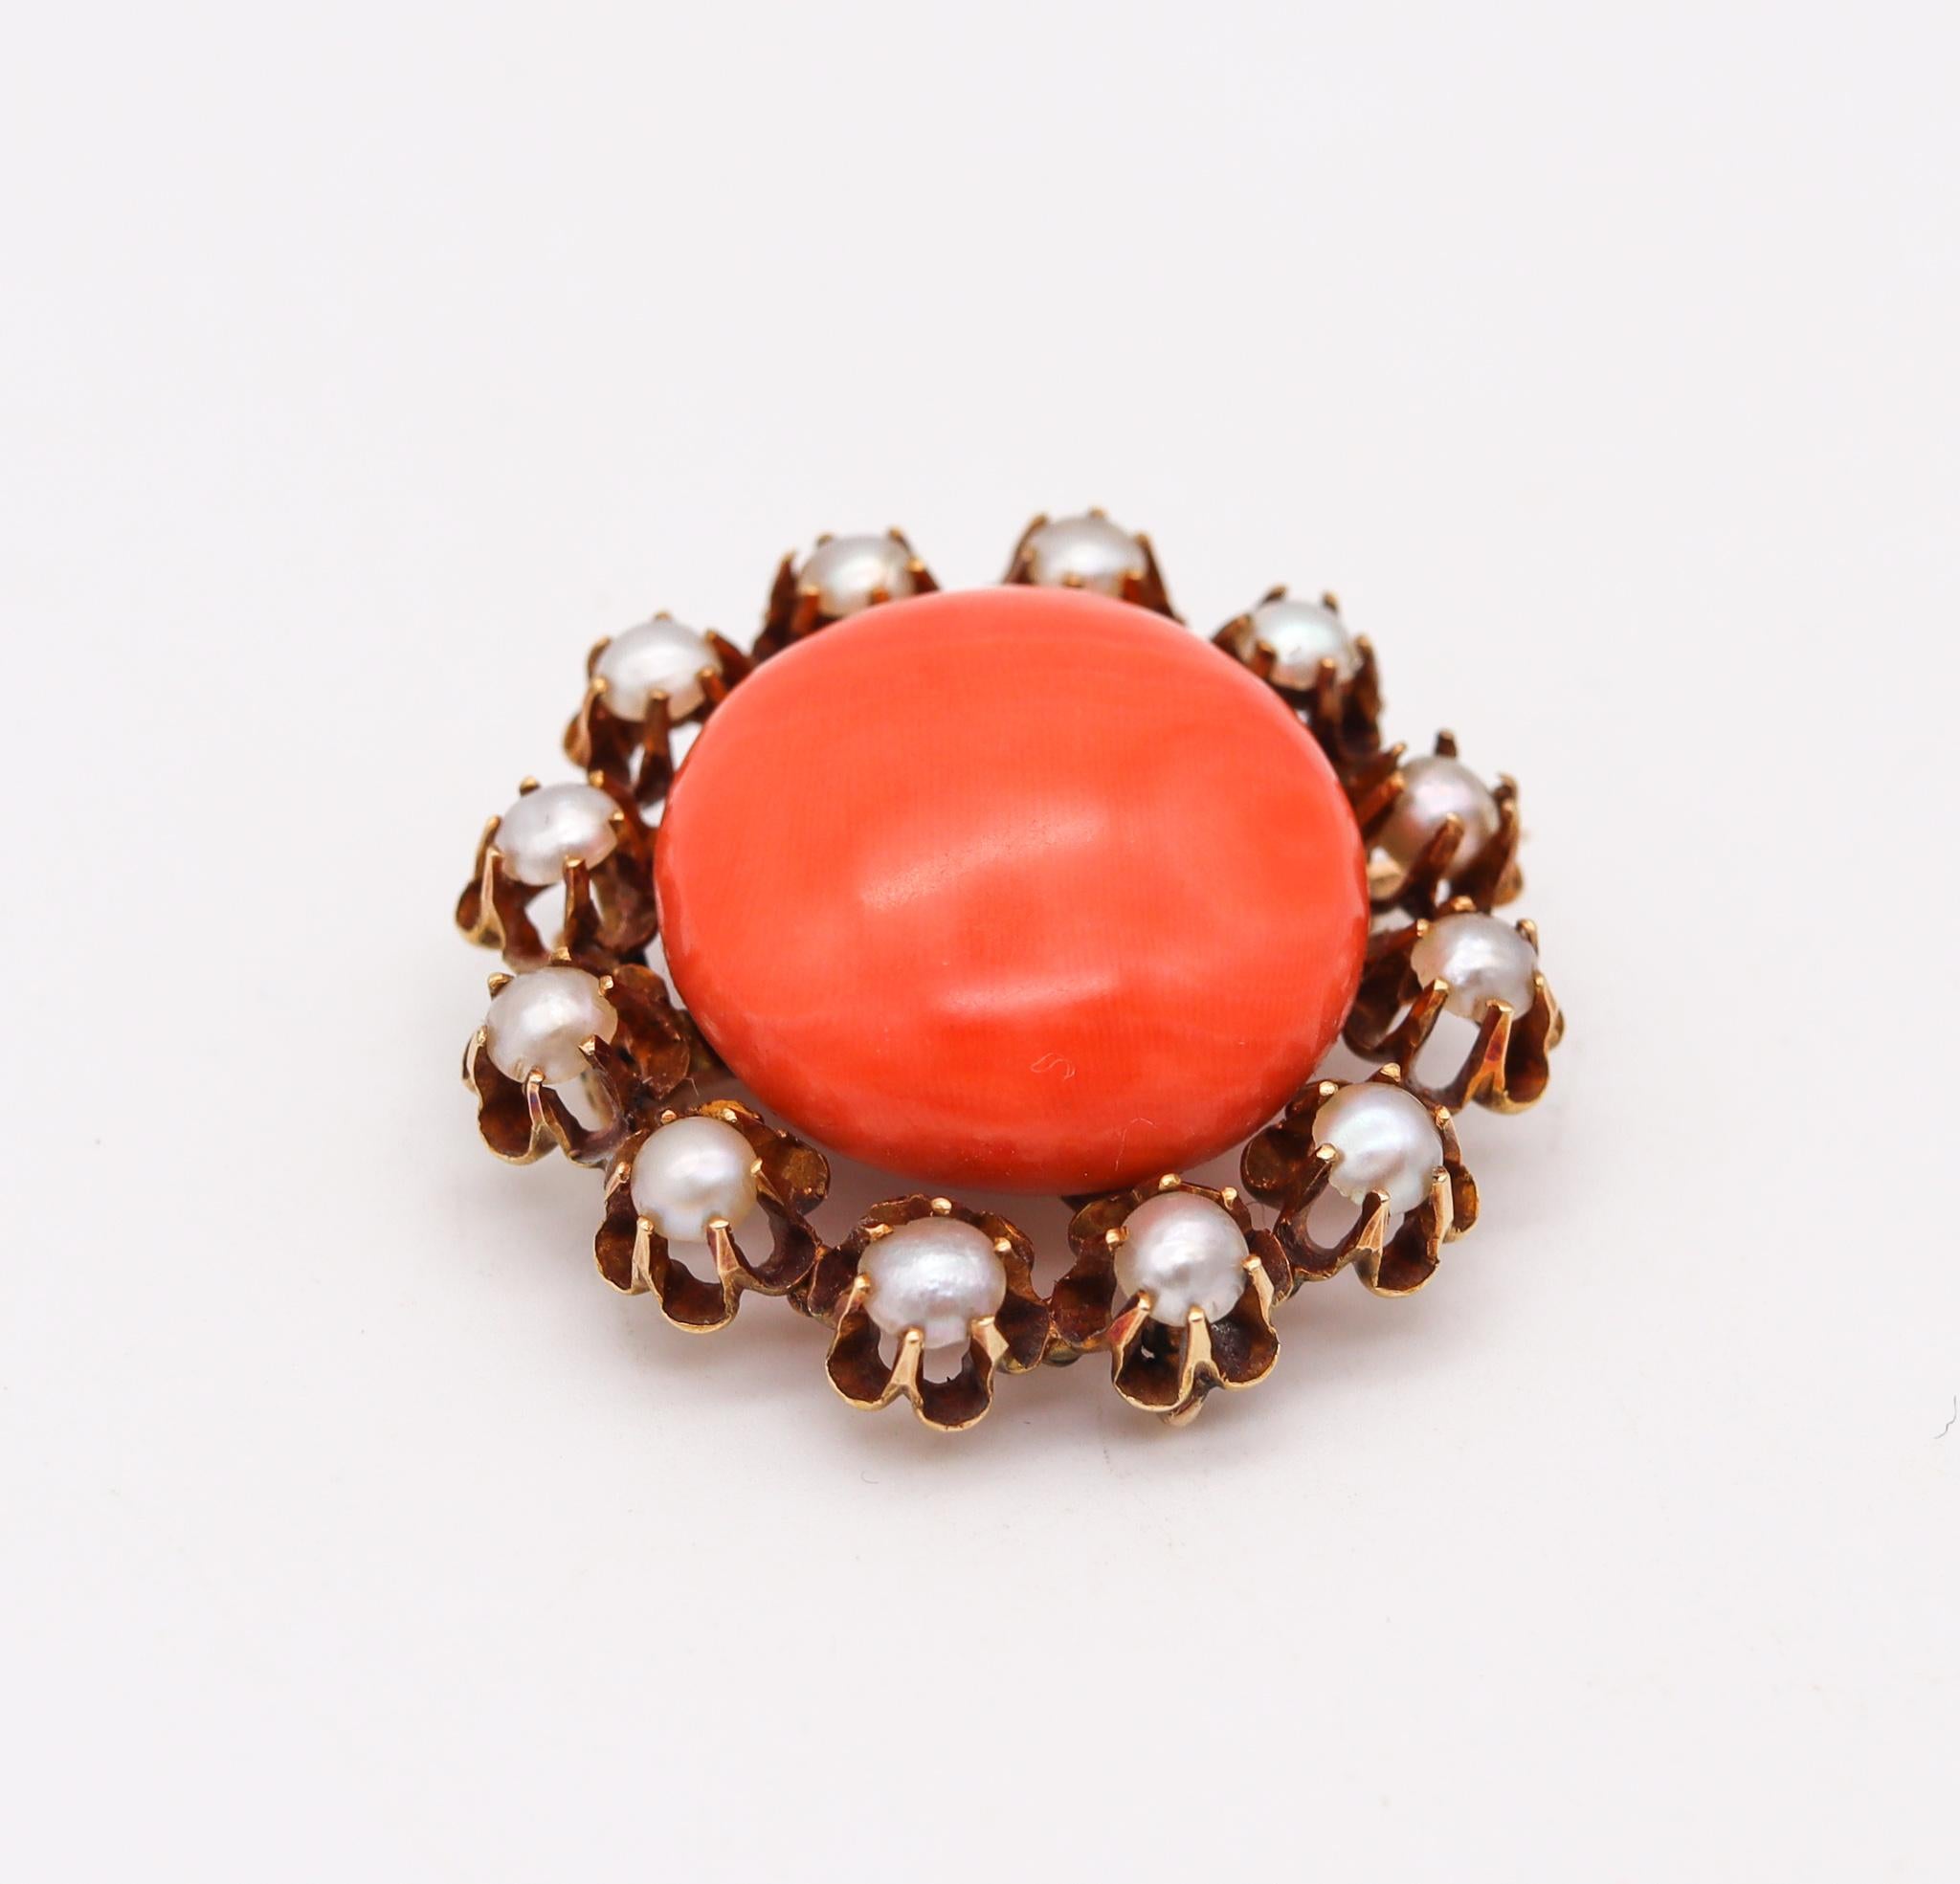 Victorian pendant brooch with coral and pearls.

Classic piece created in England during the Victorian era (1837-1901) back in the 1880. This very versatile convertible pendant-brooch has been crafted with Etruscan revival patterns in solid yellow